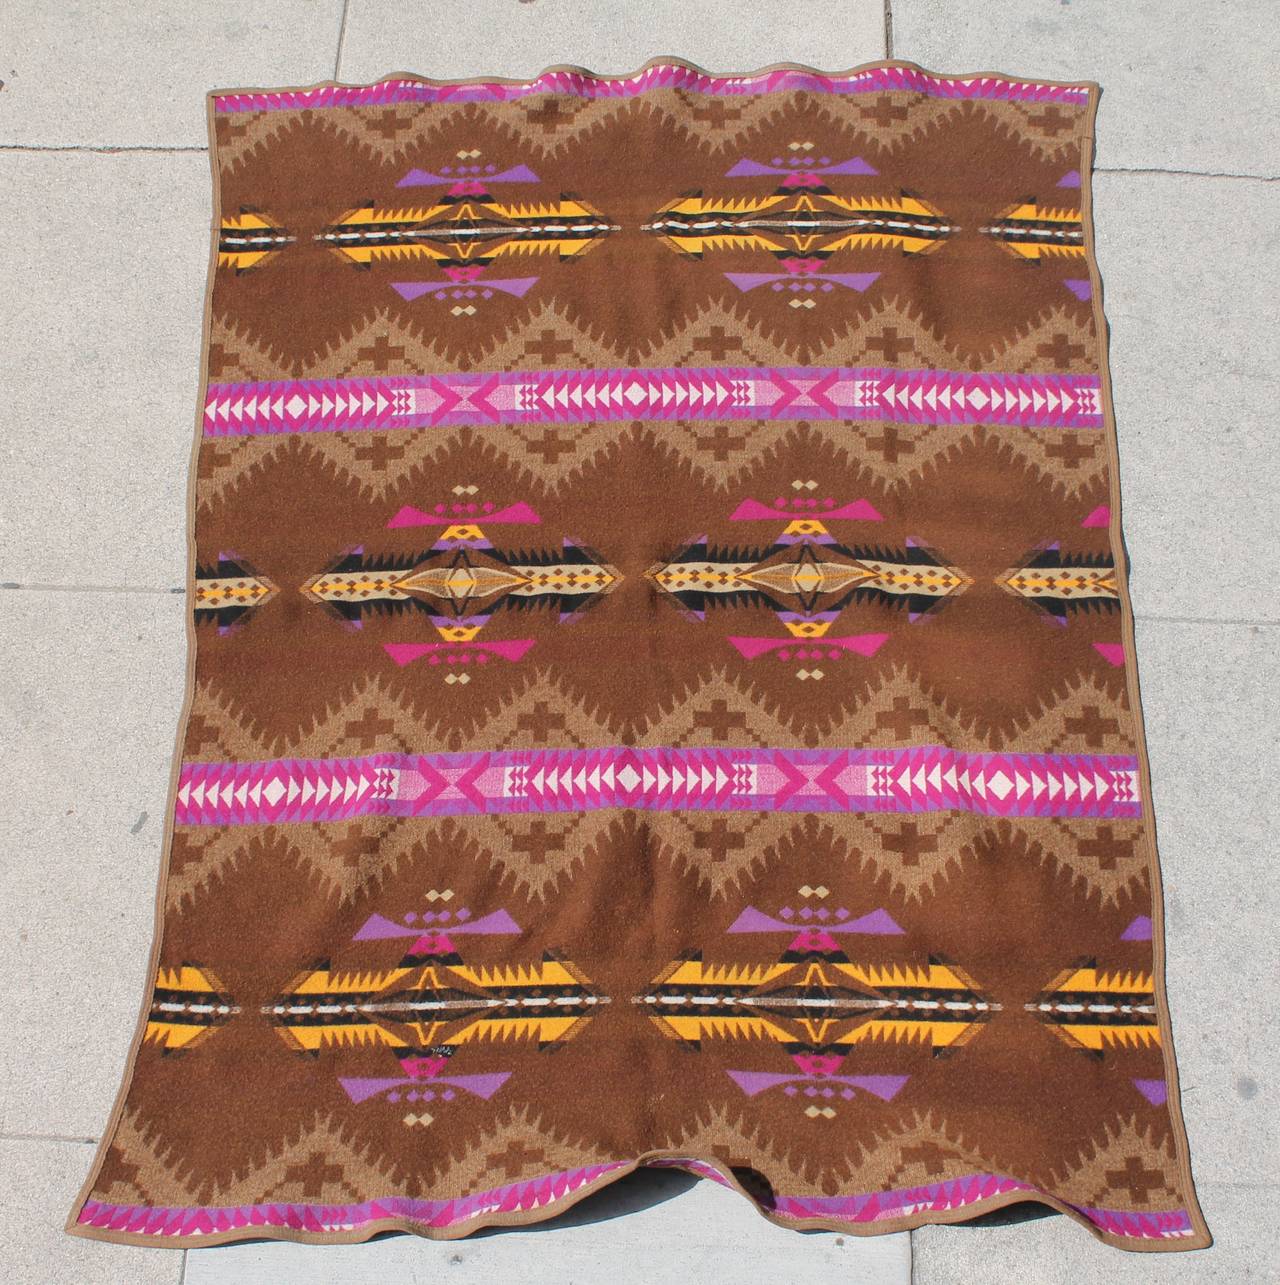 Early 20th c most unusual  &  rare Jacobs Indian design camp blanket made by Oregon City. This blanket retains the original label with minor wear. Such a fantastic geometric pattern and colors.